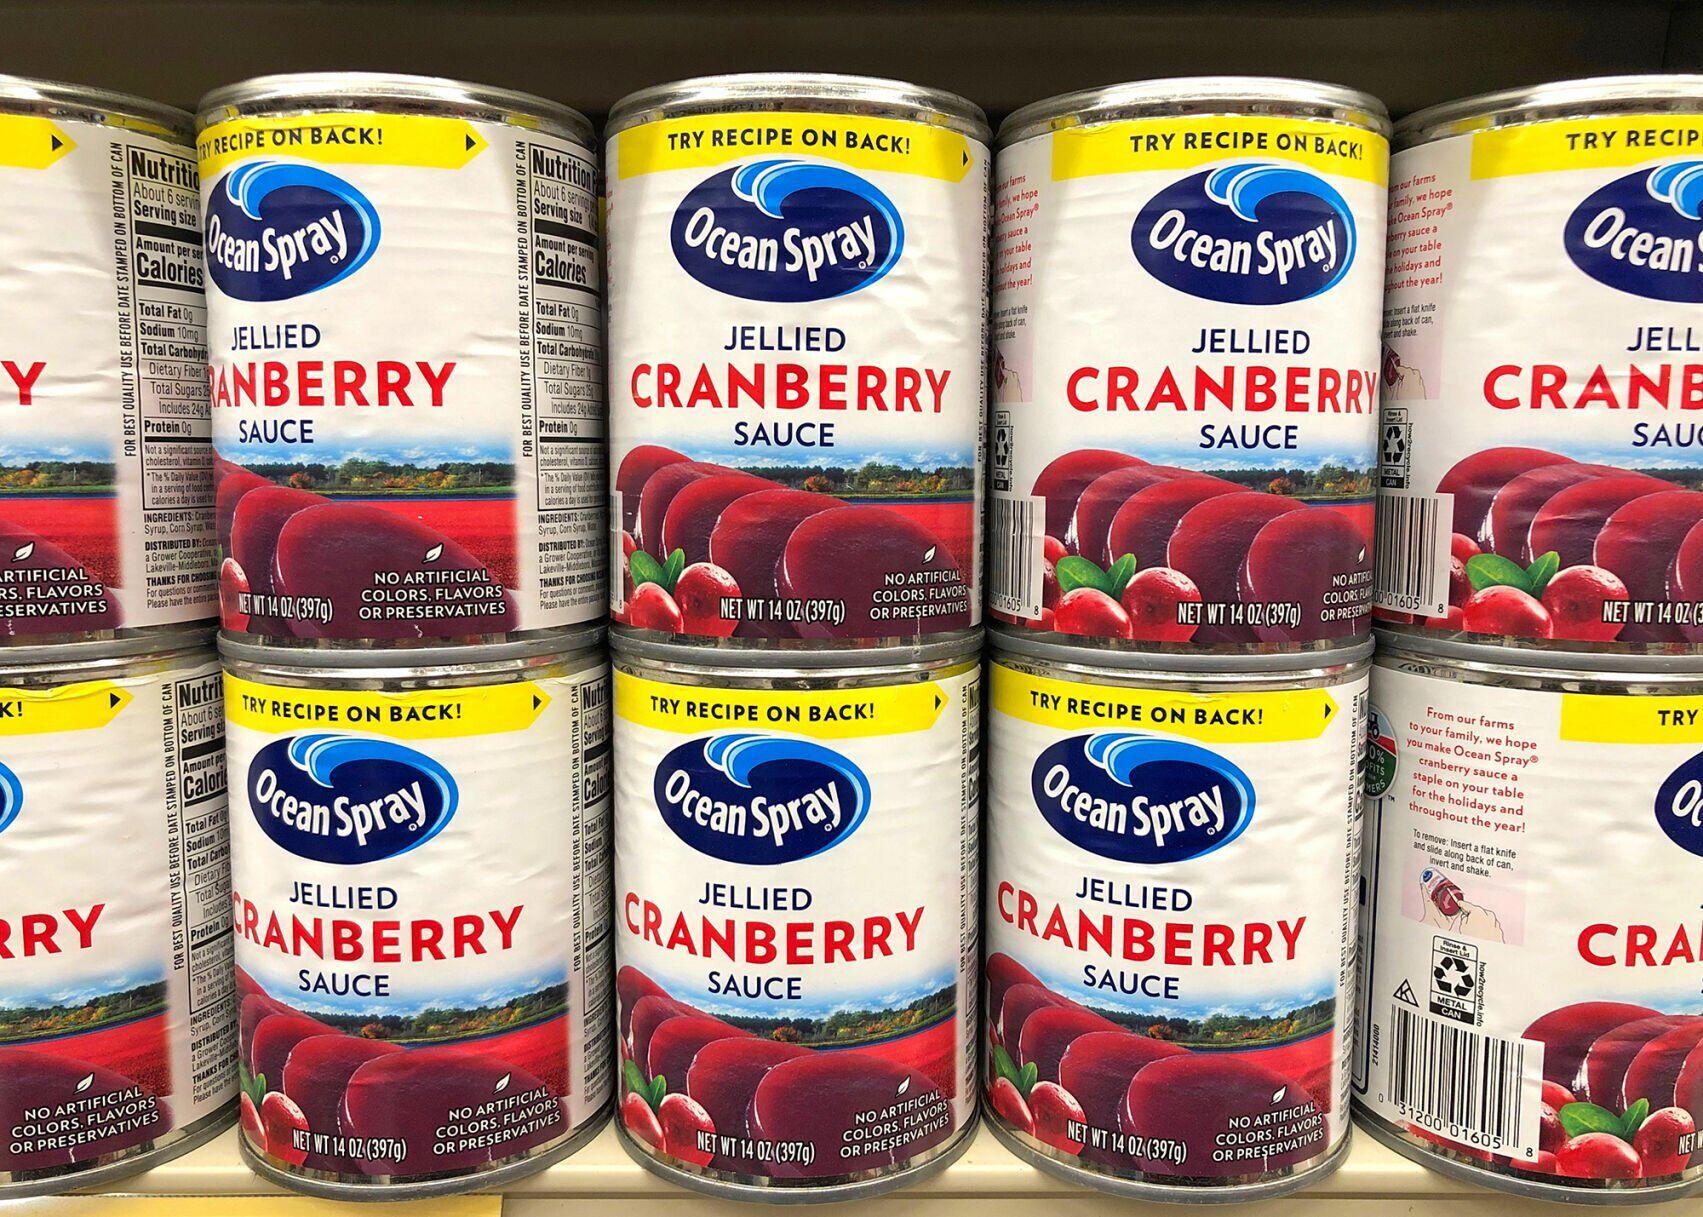 Here's why Ocean Spray cranberry sauce labels are upside down